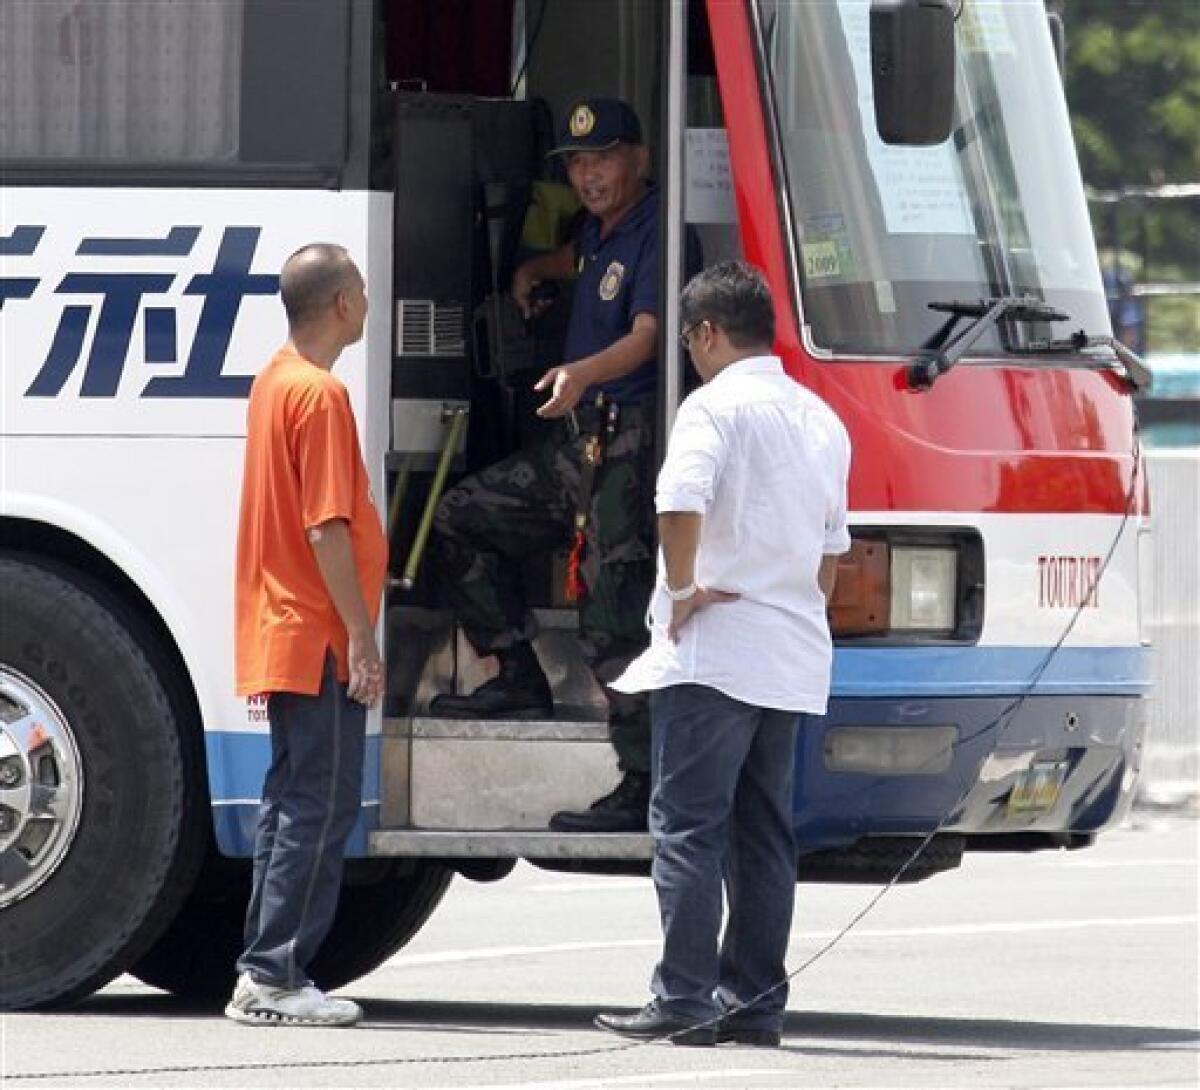 Police Senior Inspector Rolando Mendoza stands by the entrance of a tourist bus as negotiators talk to him during a standoff at Manila's Rizal Park Monday, Aug. 23, 2010 in Manila, Philippines. Mendoza, a dismissed policeman armed with automatic rifle, seized the bus in Manila Monday with 25 people aboard, mostly Hong Kong tourists in a bid to demand reinstatement, police said. (AP Photo/Bullit Marquez)